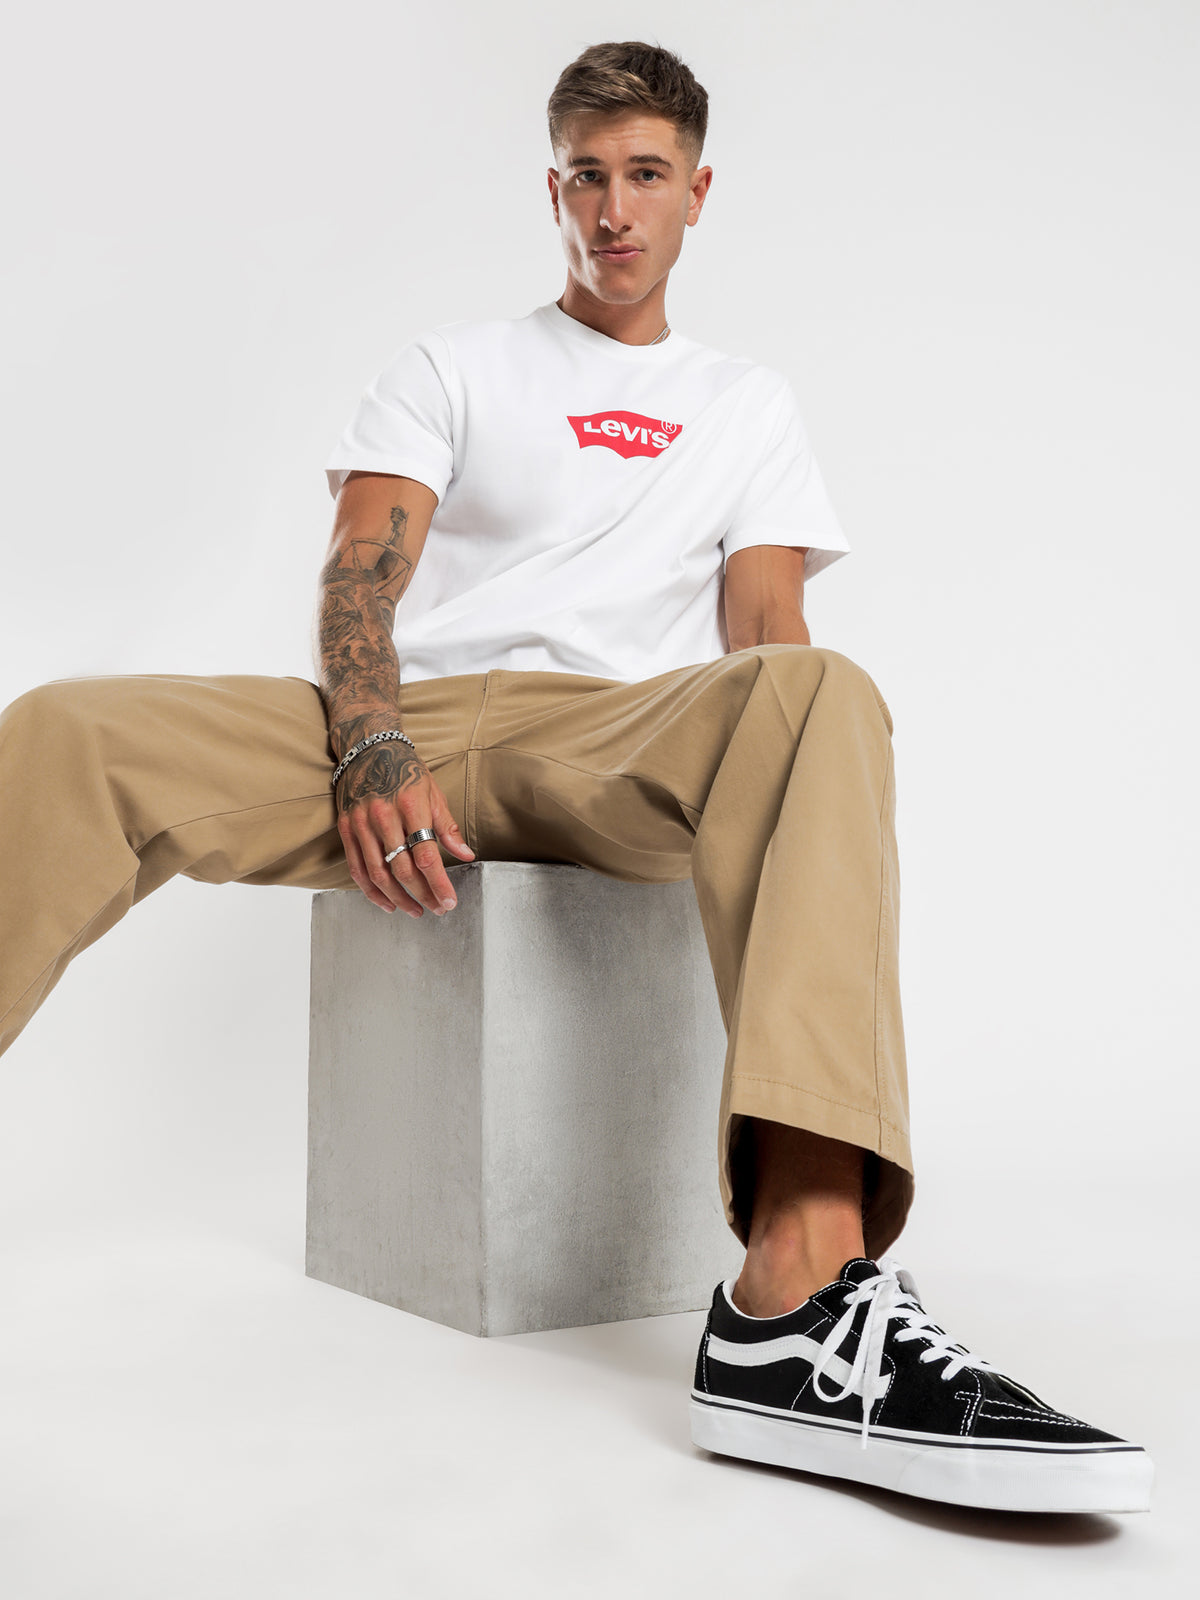 XX Chino Stay Loose Pants in Beige